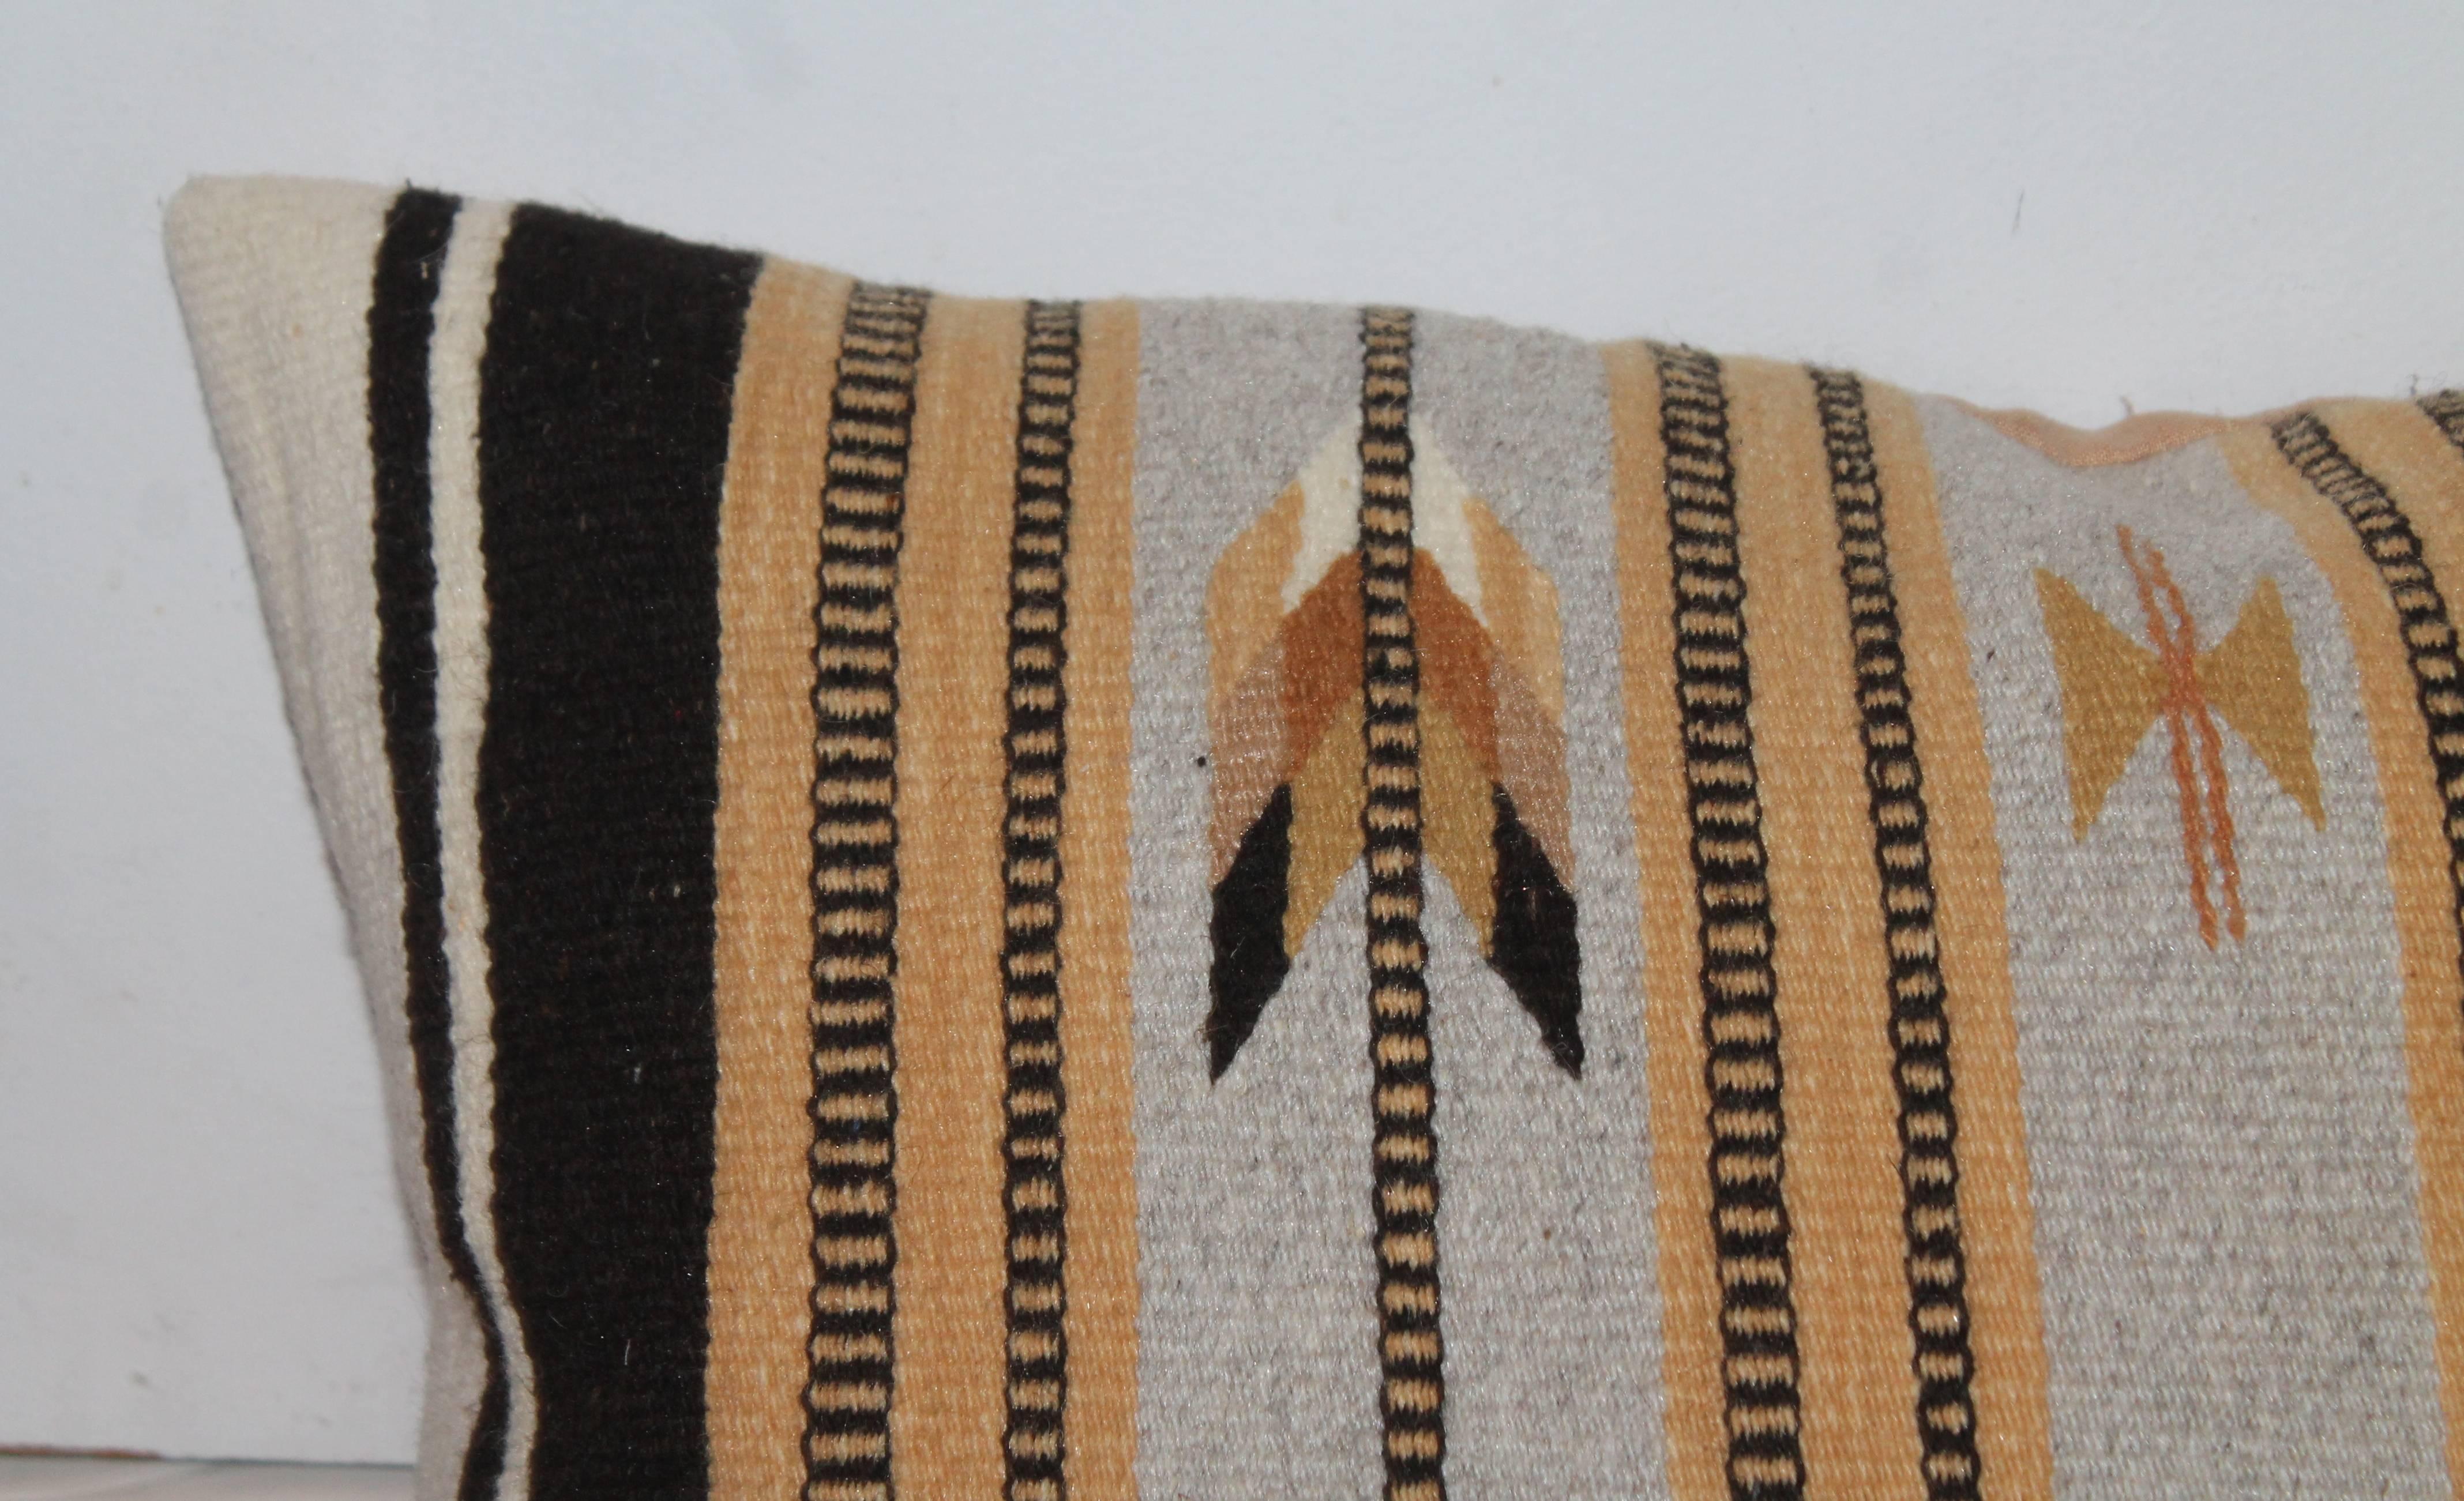 Geometric Navajo Indian weaving bolster pillow with a cotton tan linen backing. The condition is very good.